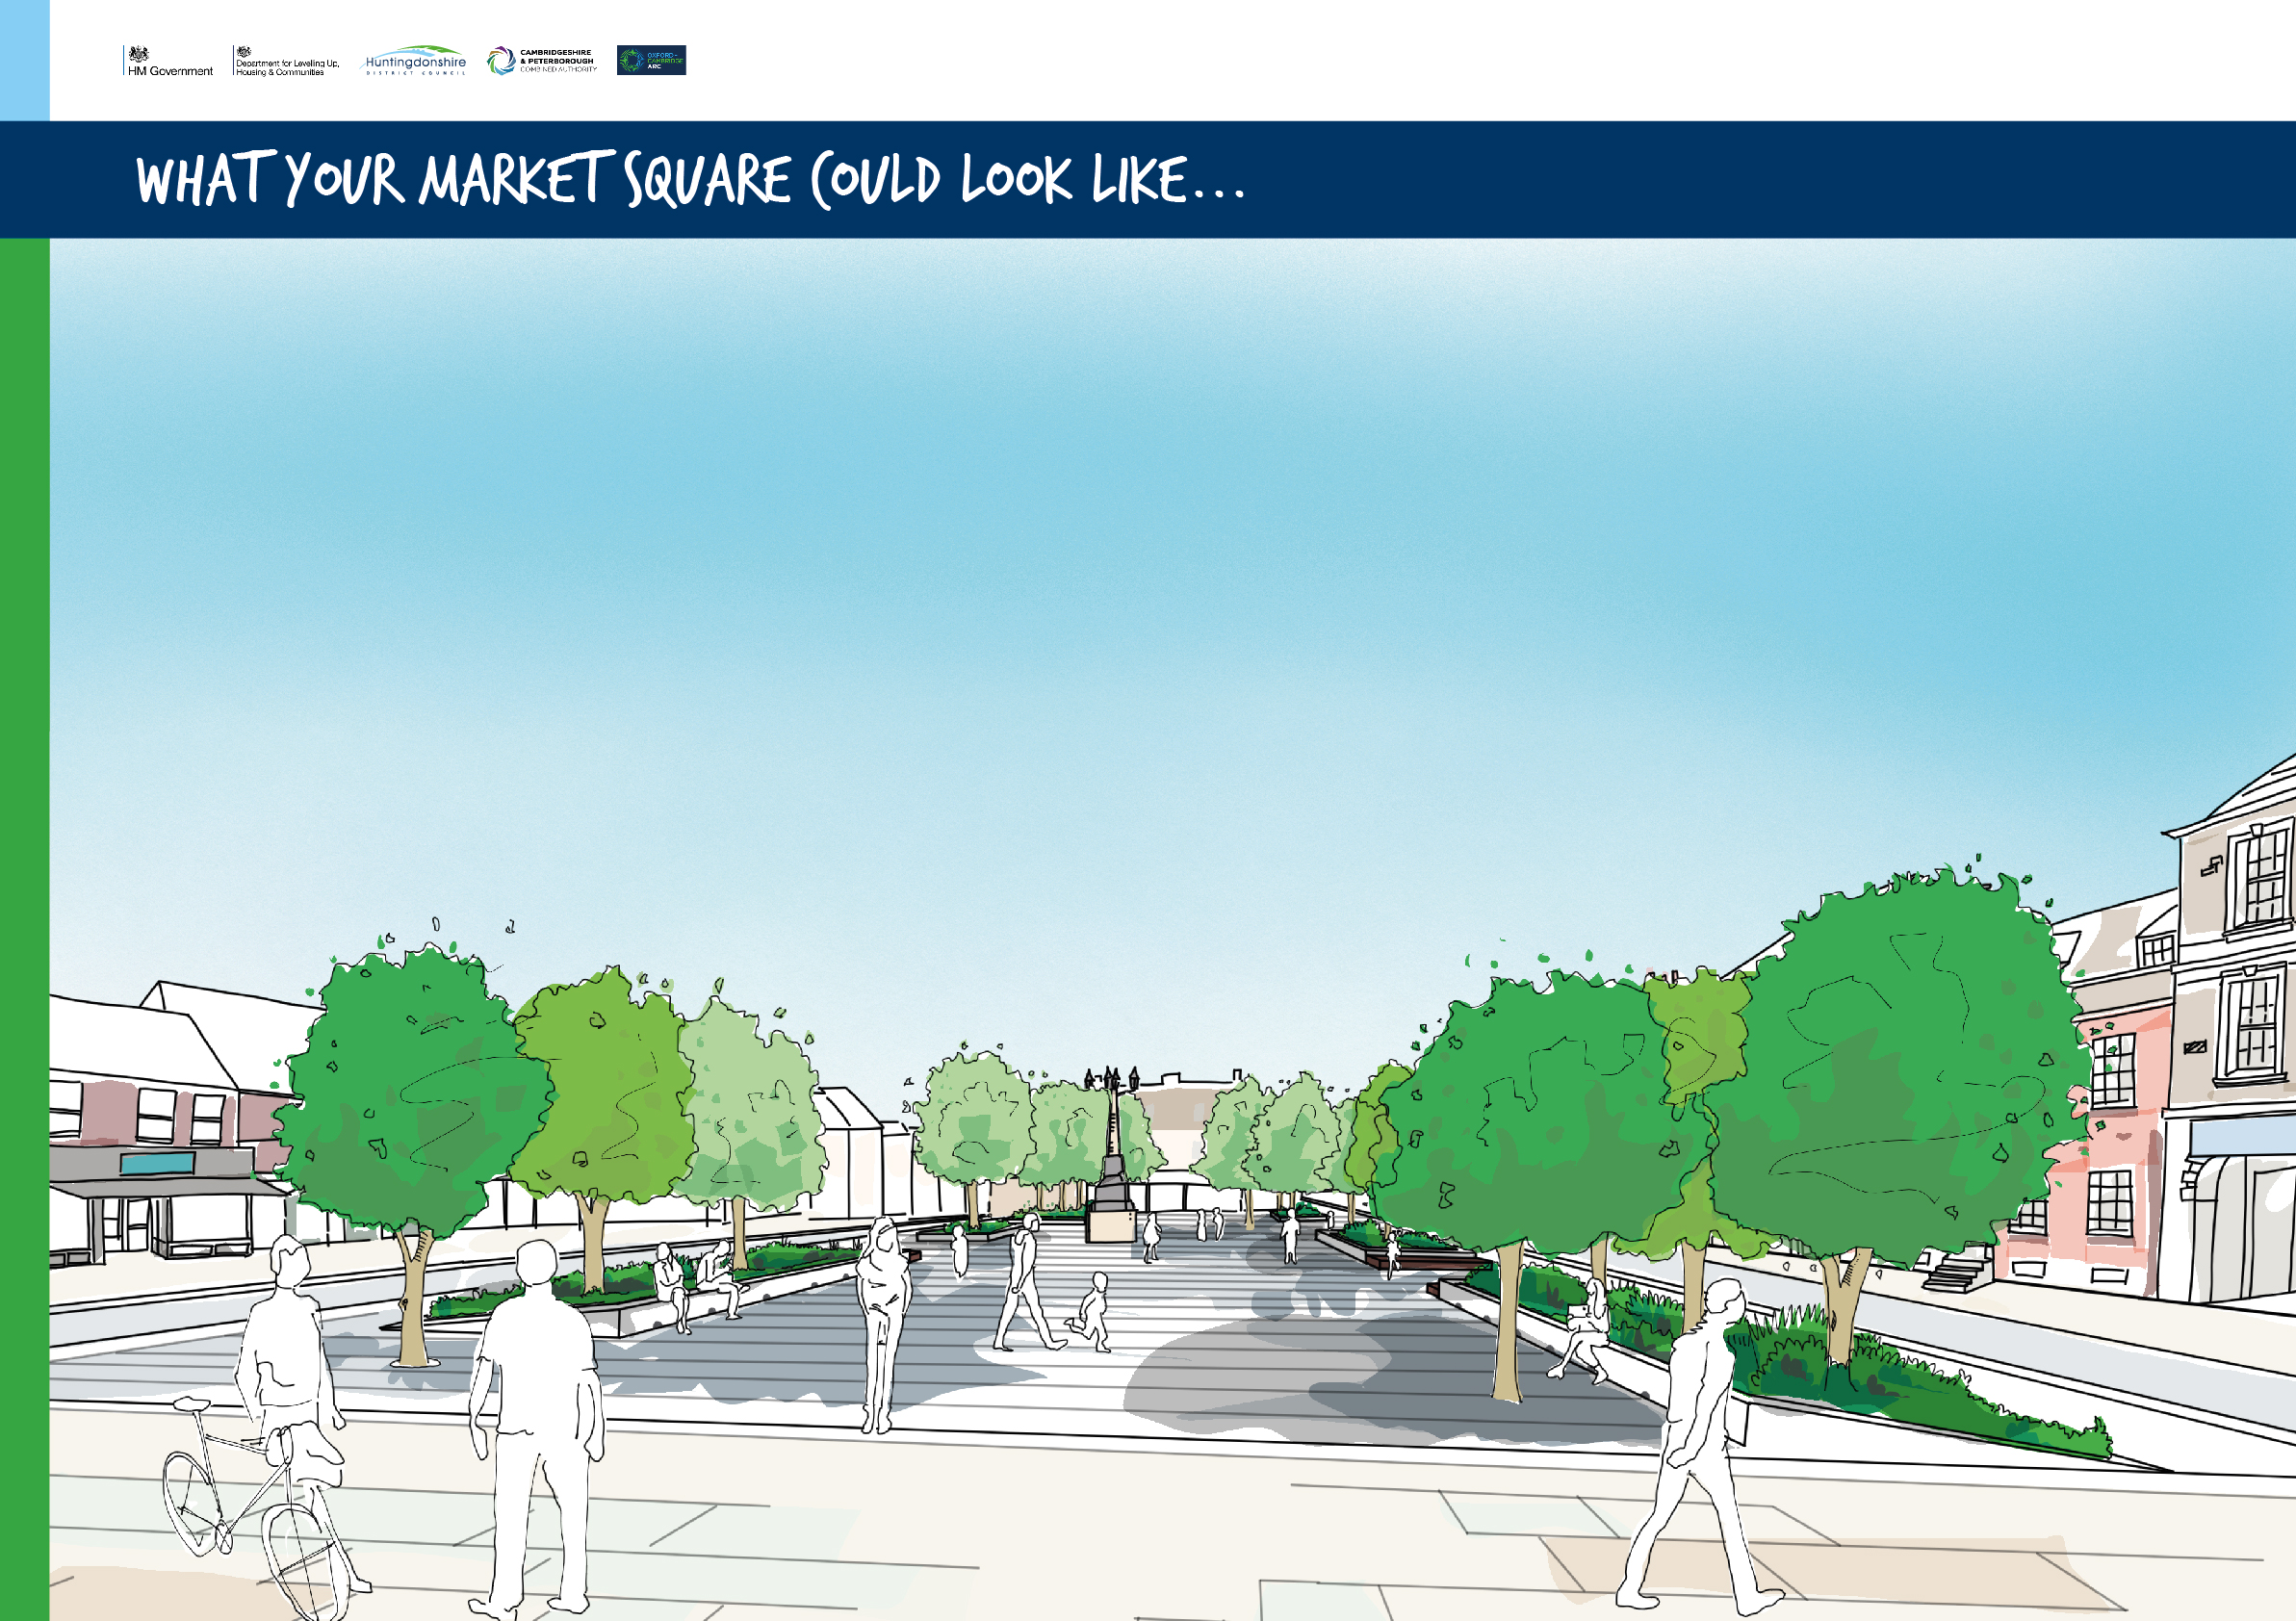 What your Market Square could look like. Image showing an artist’s impression of the Market Square.